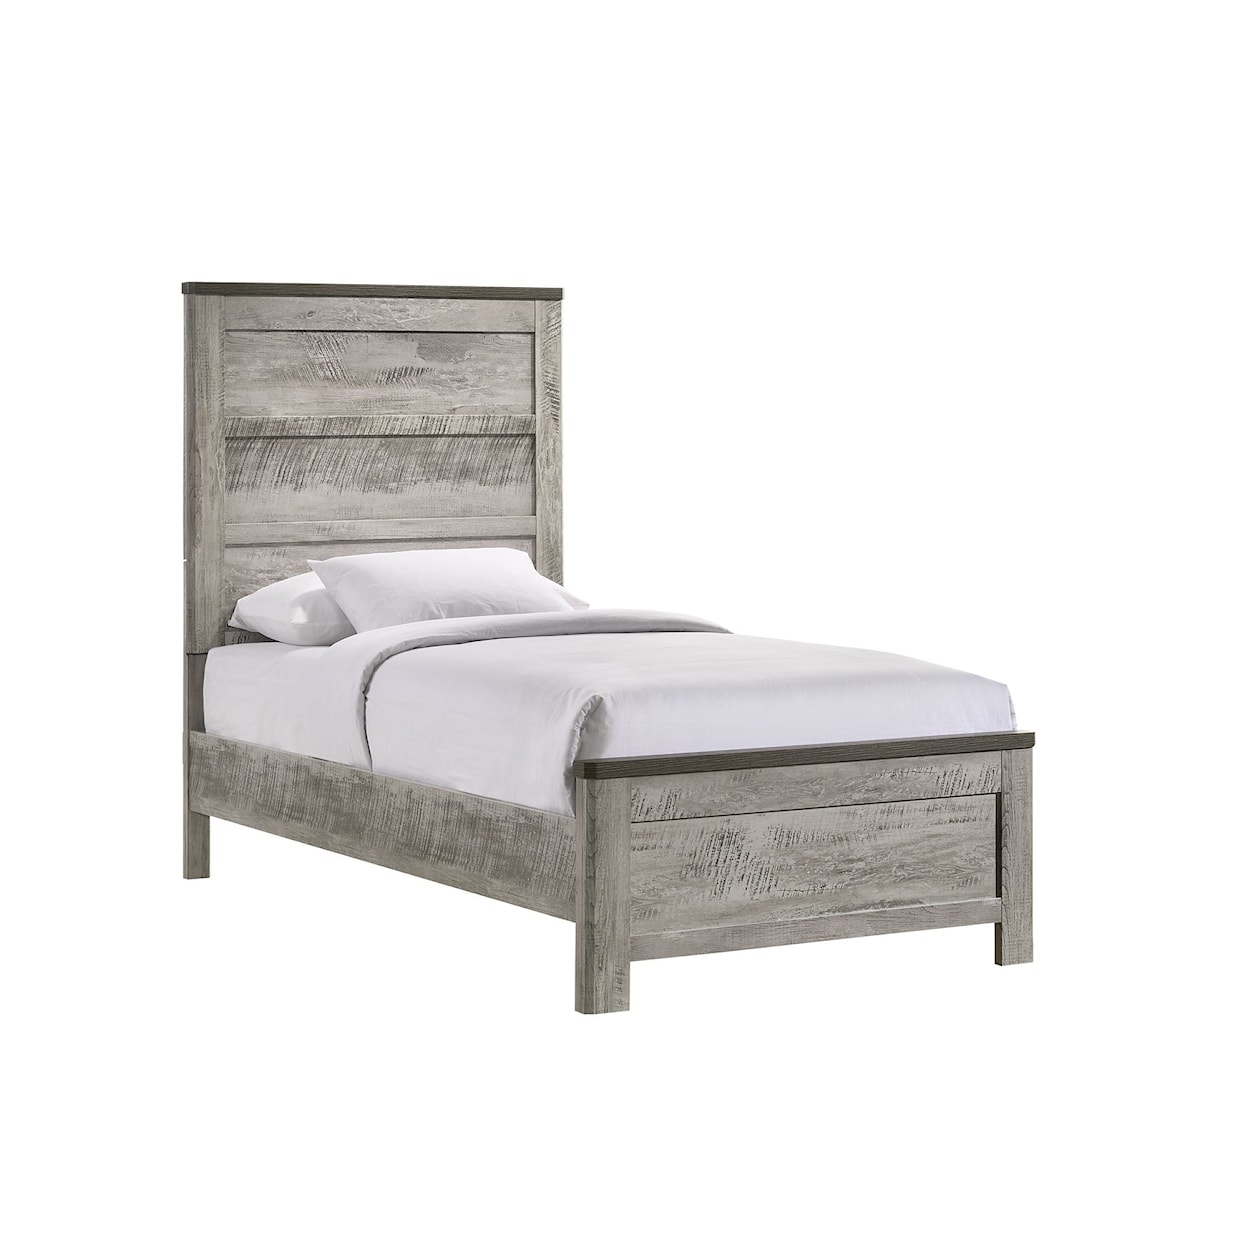 Elements International Millers Cove- Millers Cove Twin 5PC Bedroom Set